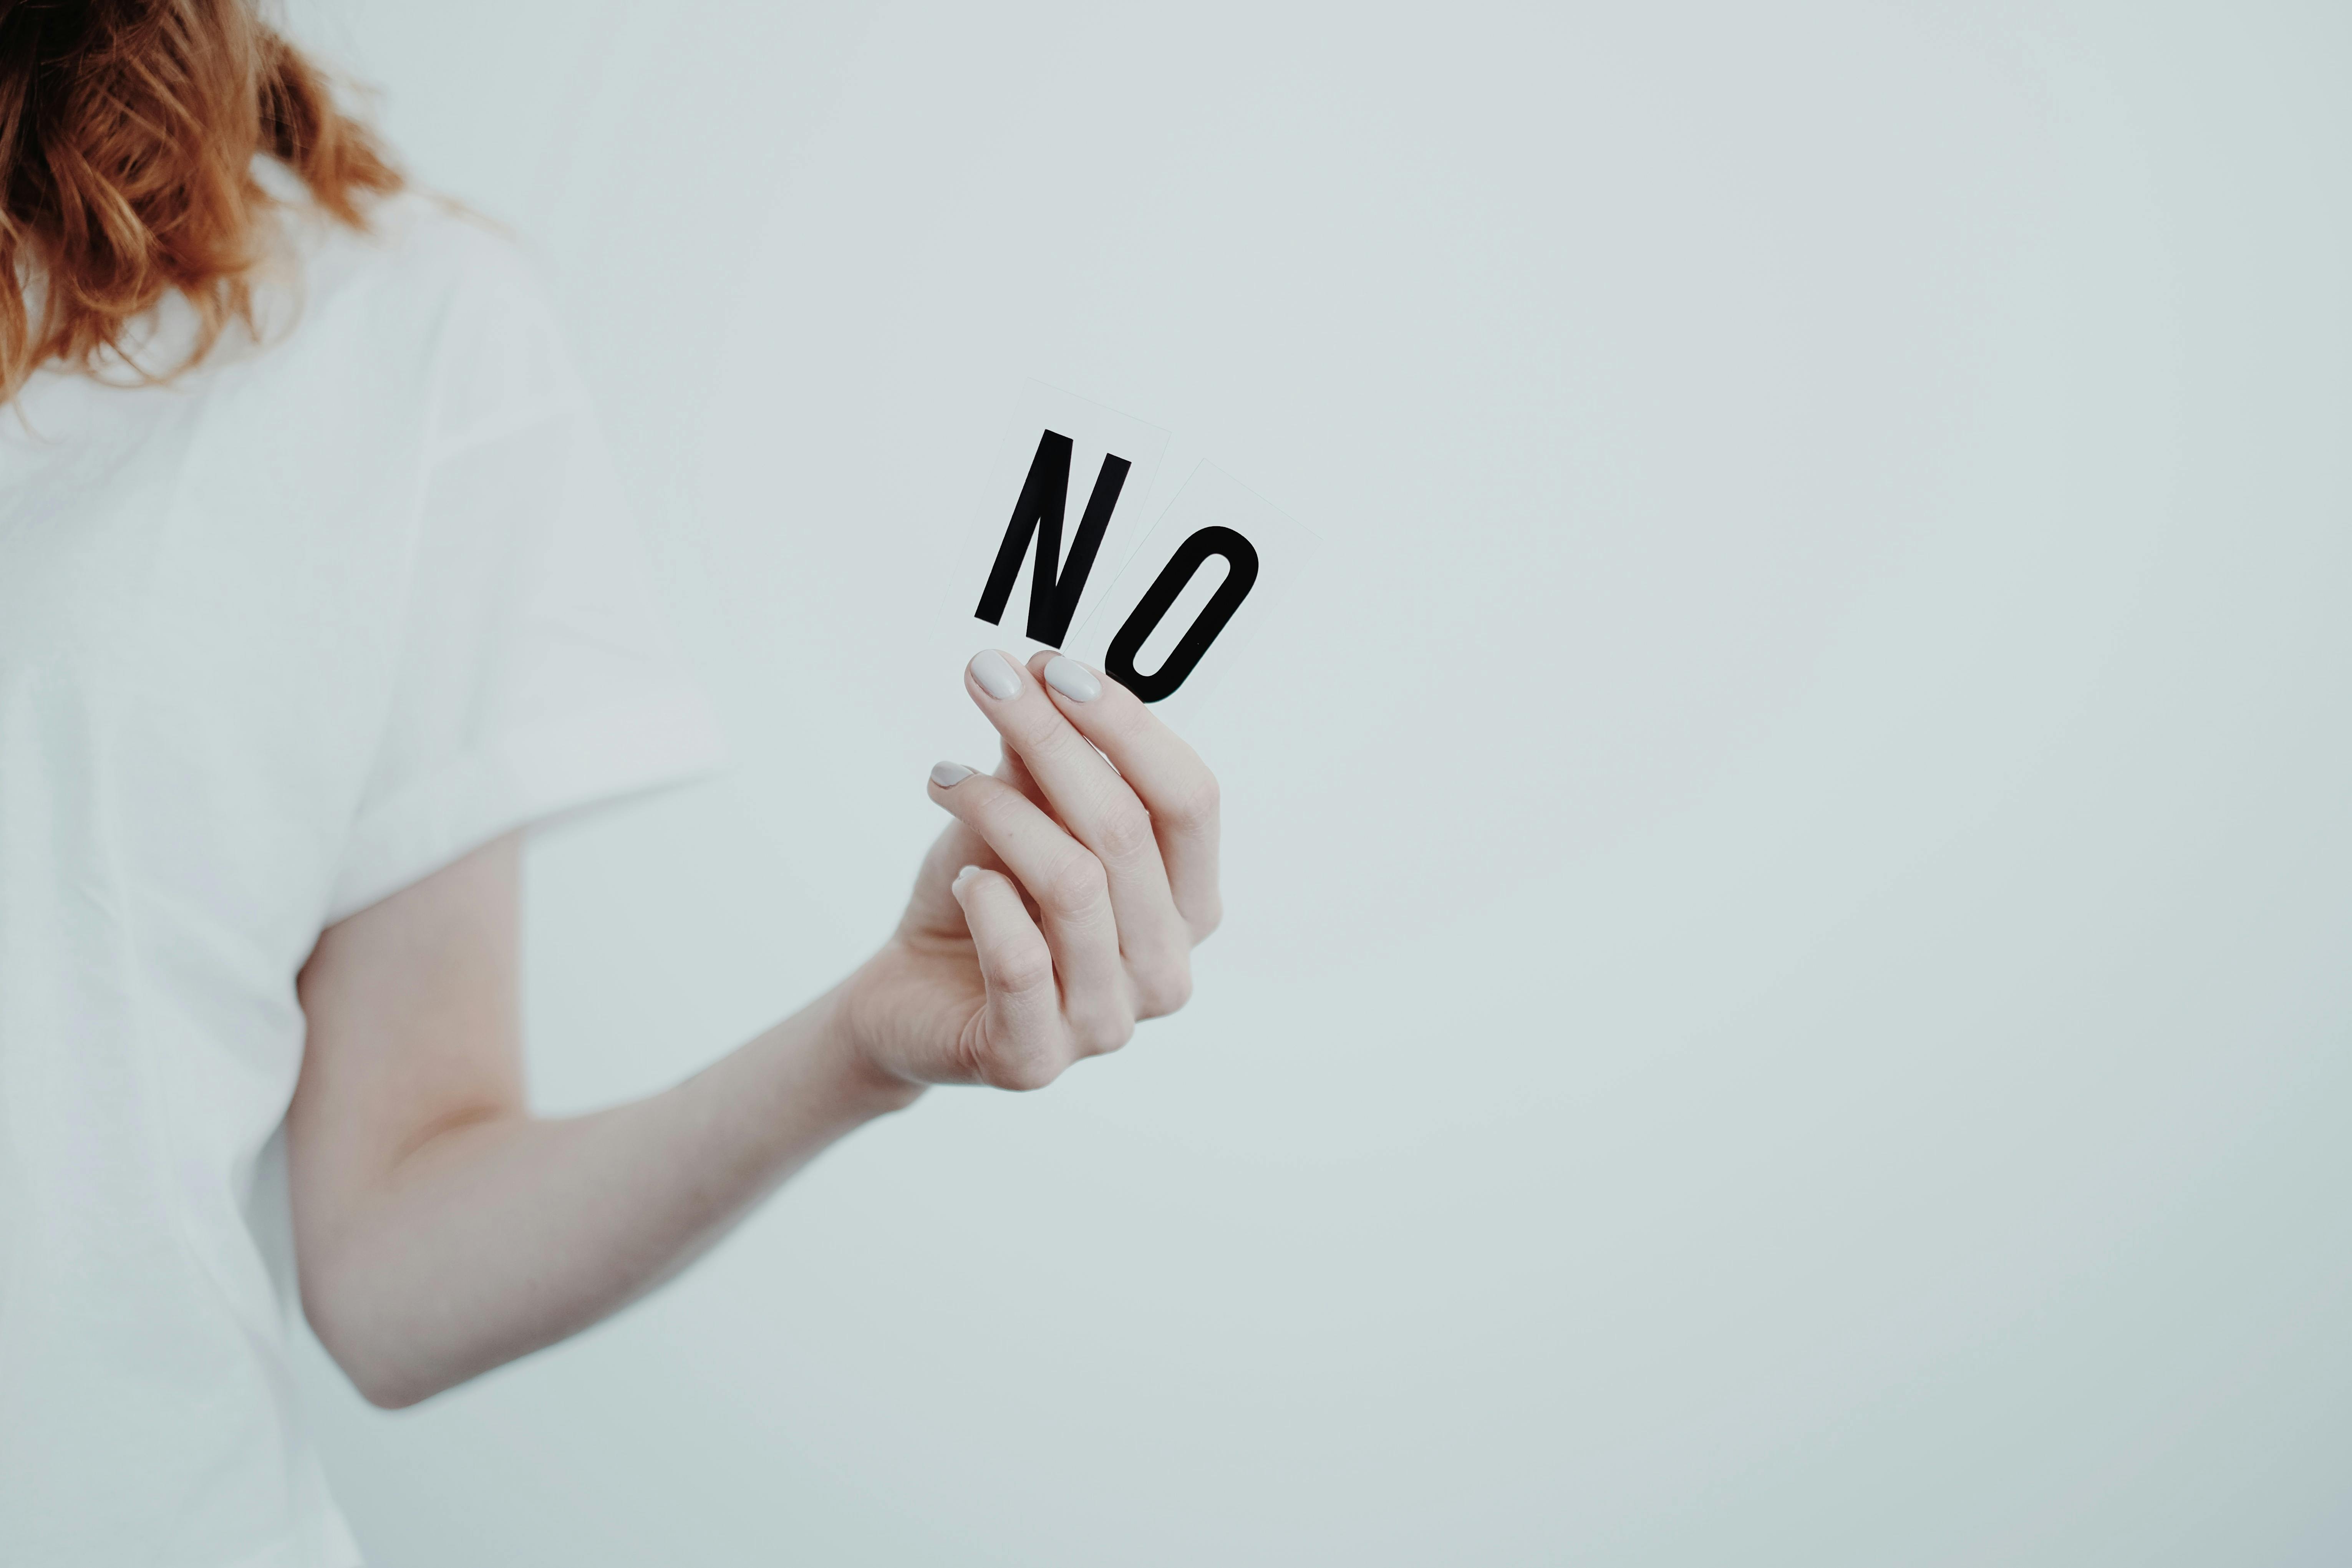 A person saying no with a sign. | Source: Pexels